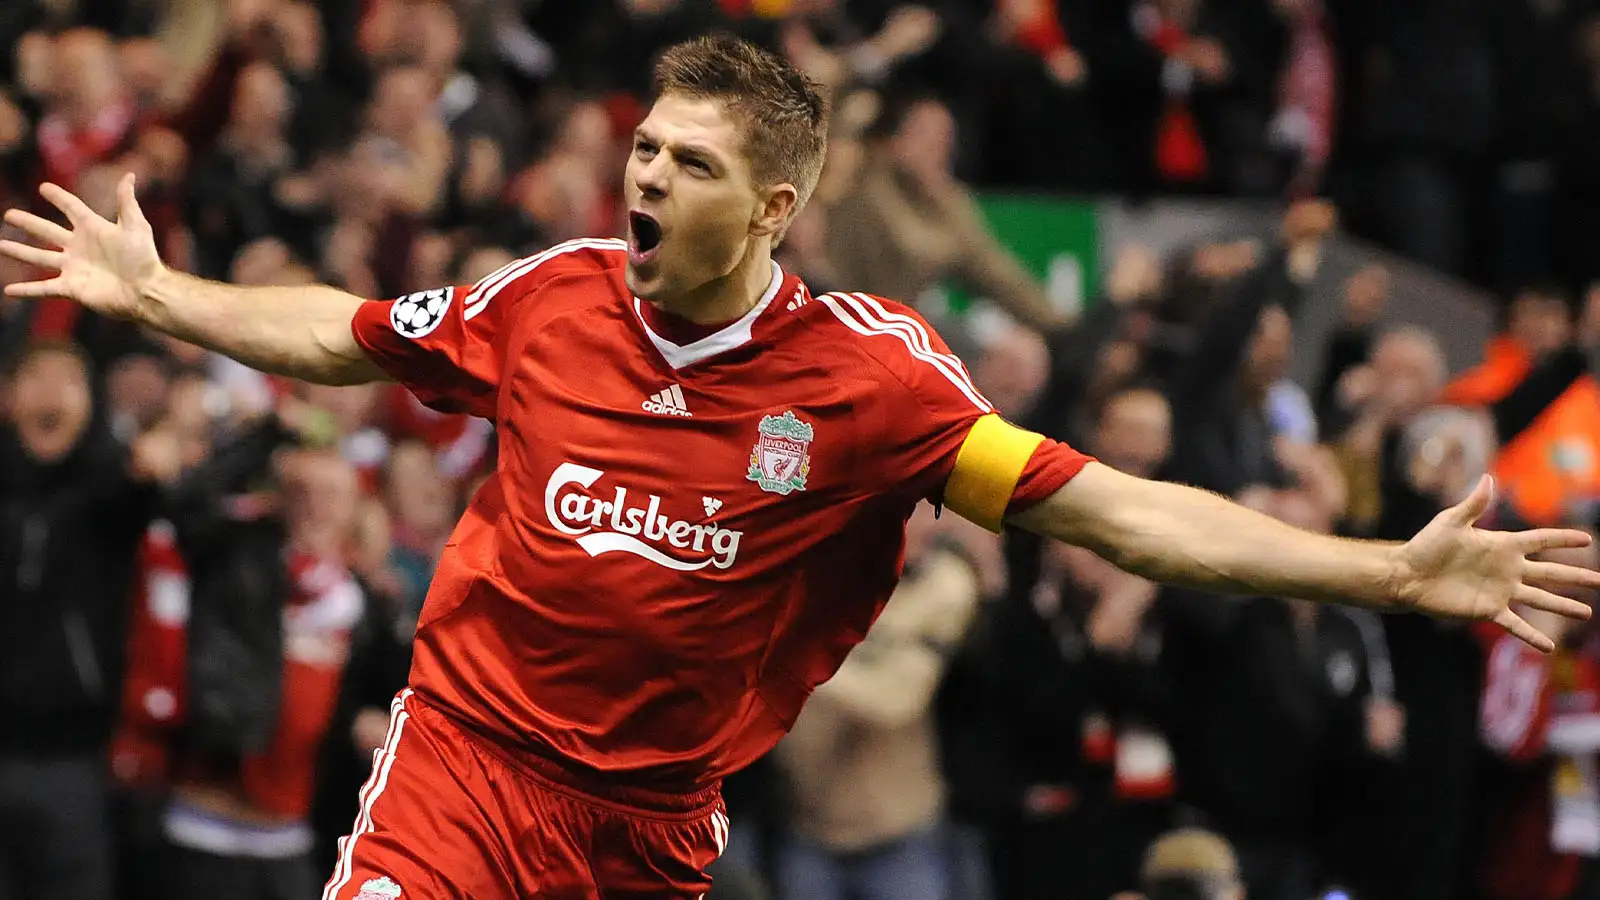 The night prime Steven Gerrard absolutely demolished Real Madrid